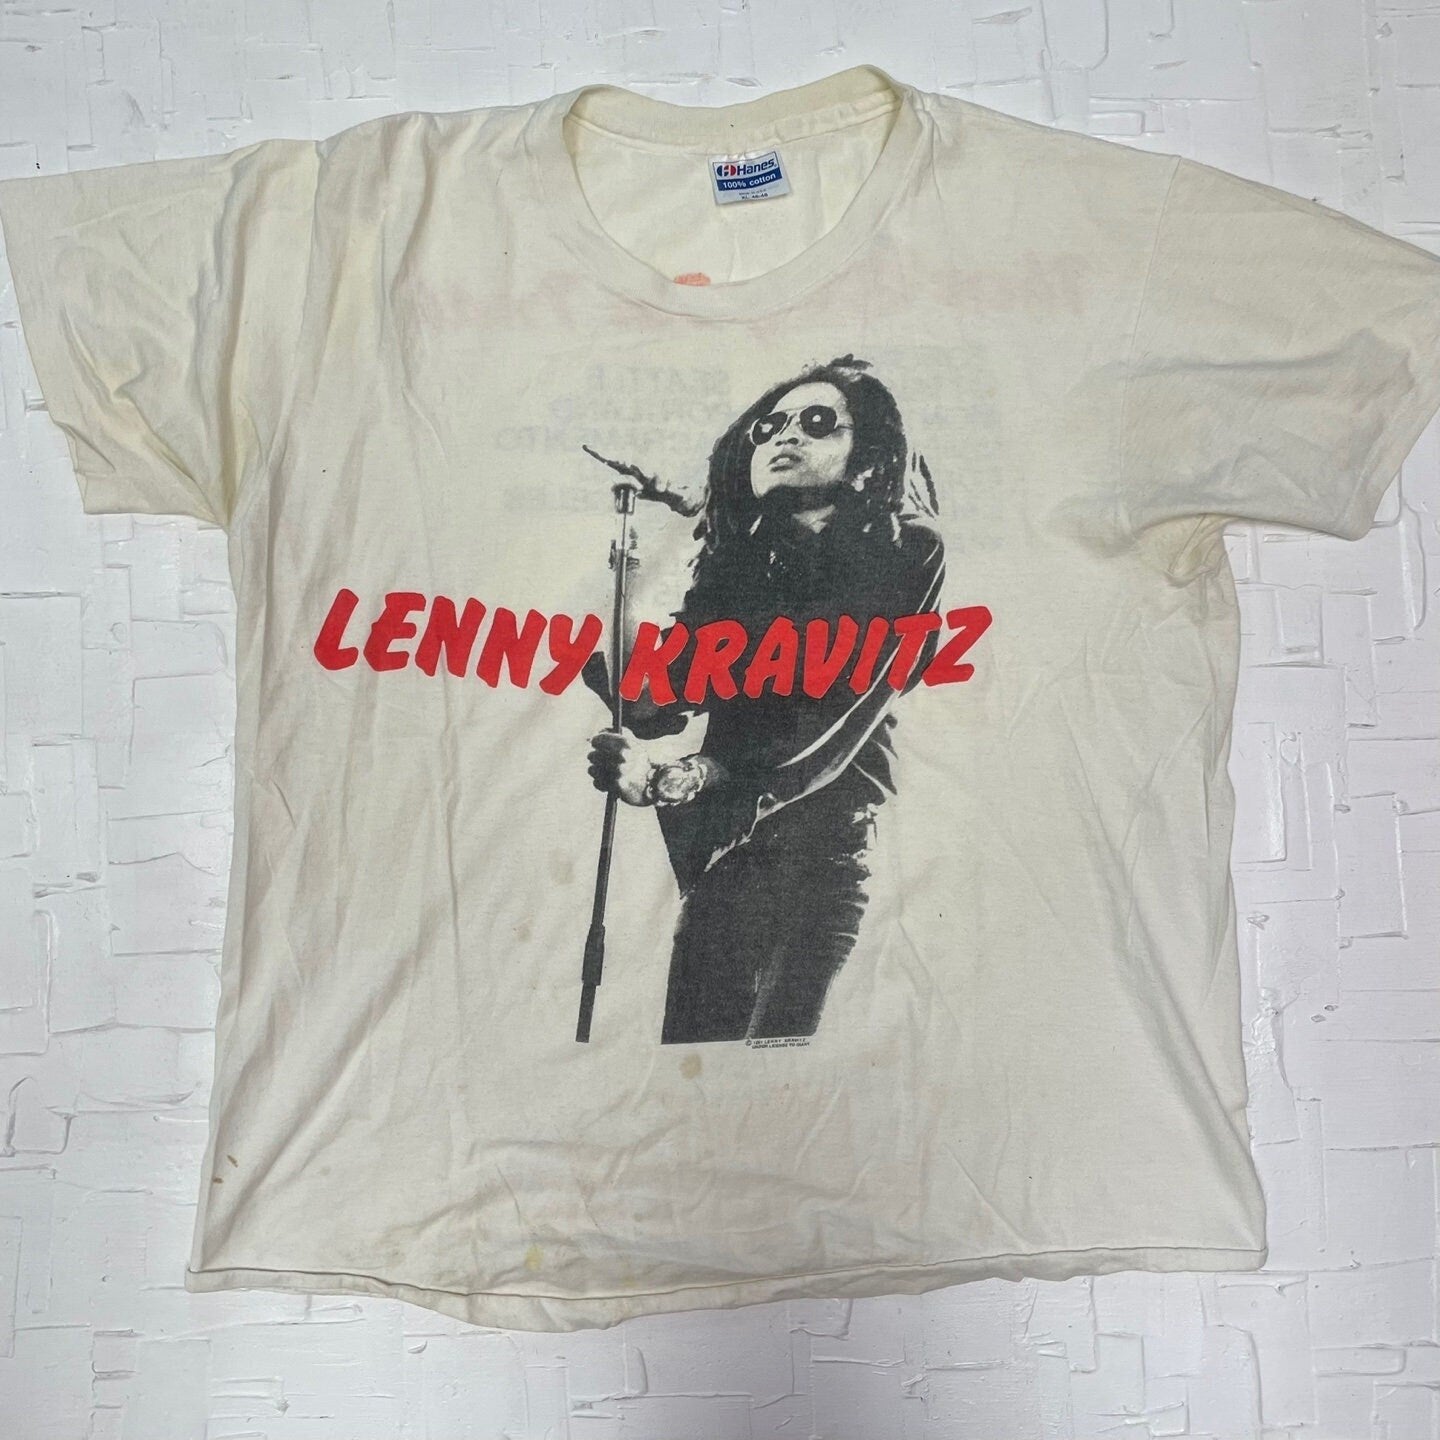 1991 Lenny Kravitz "There's Only One Truth" Tour T-Shirt | Vintage T-Shirt| Lenny Kravitz T-Shirt | Single Stitch | Size XL | SKU: M-1525